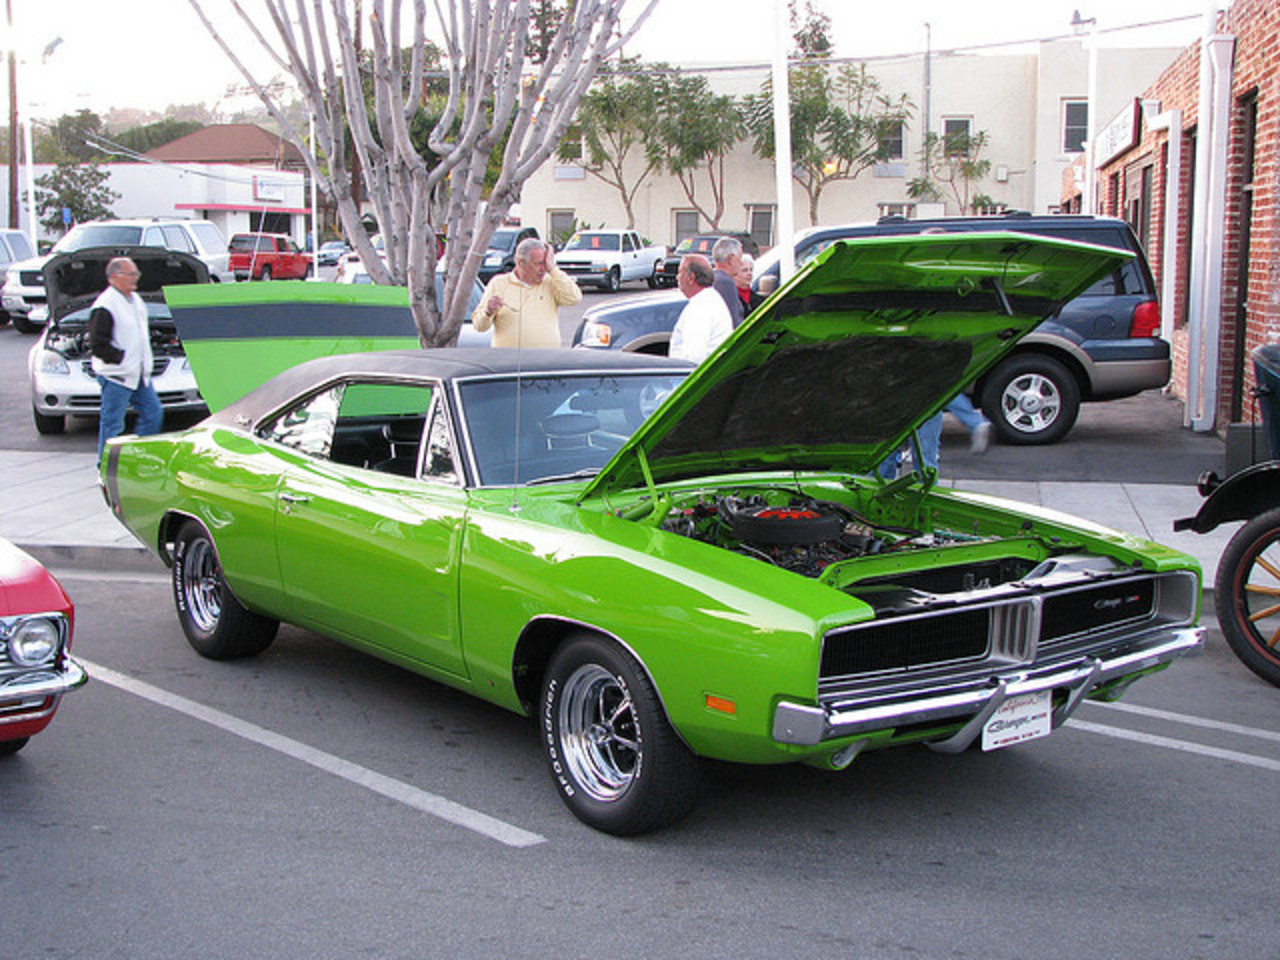 Classic Dodge Charger Hardtop - A Great Muscle Car Restored